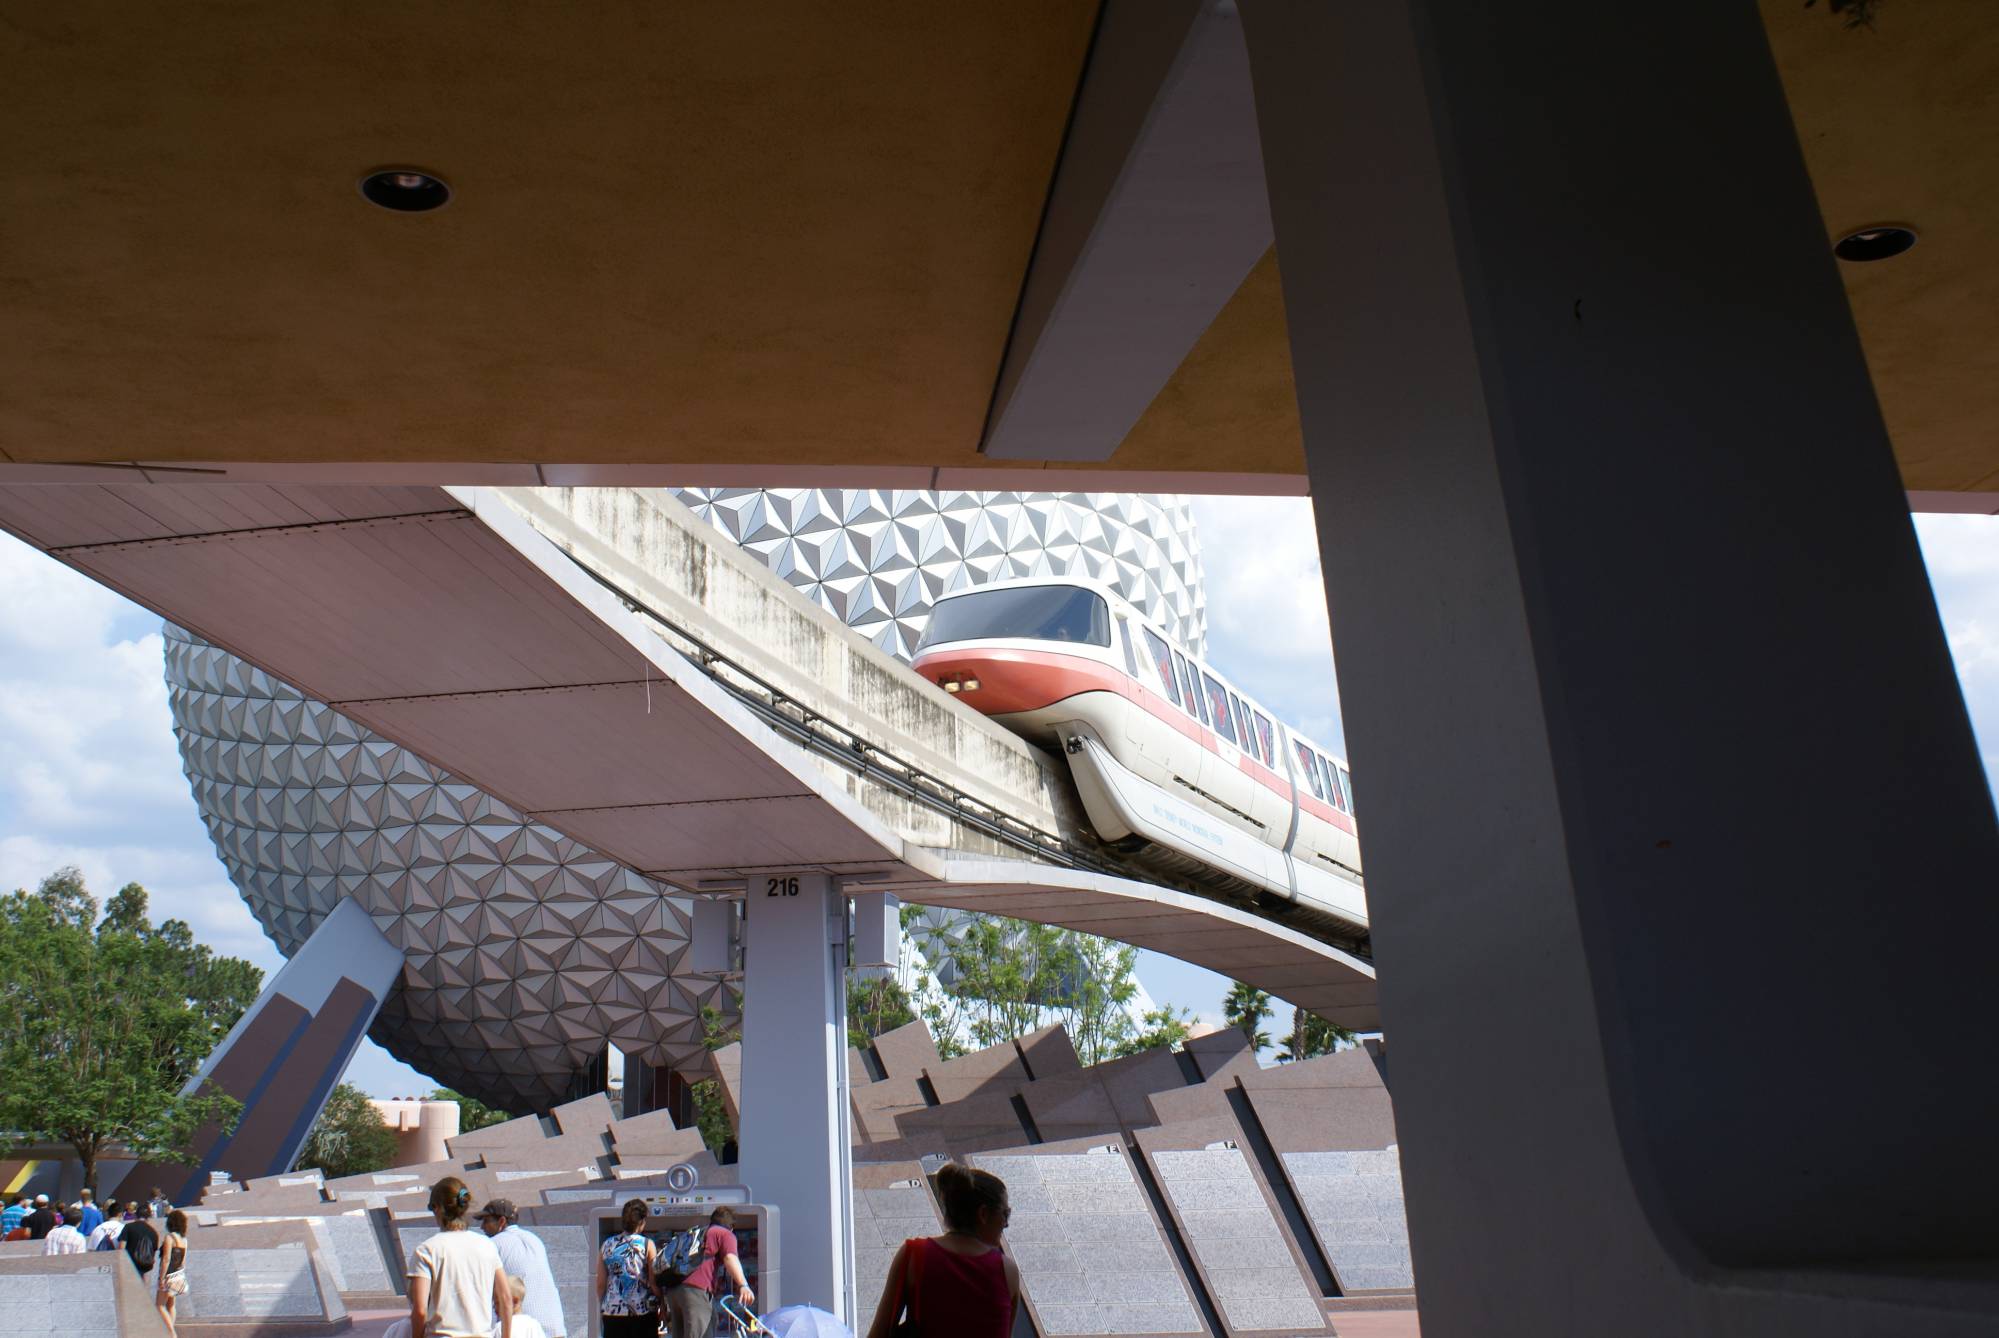 Cool Shot of the Monorail